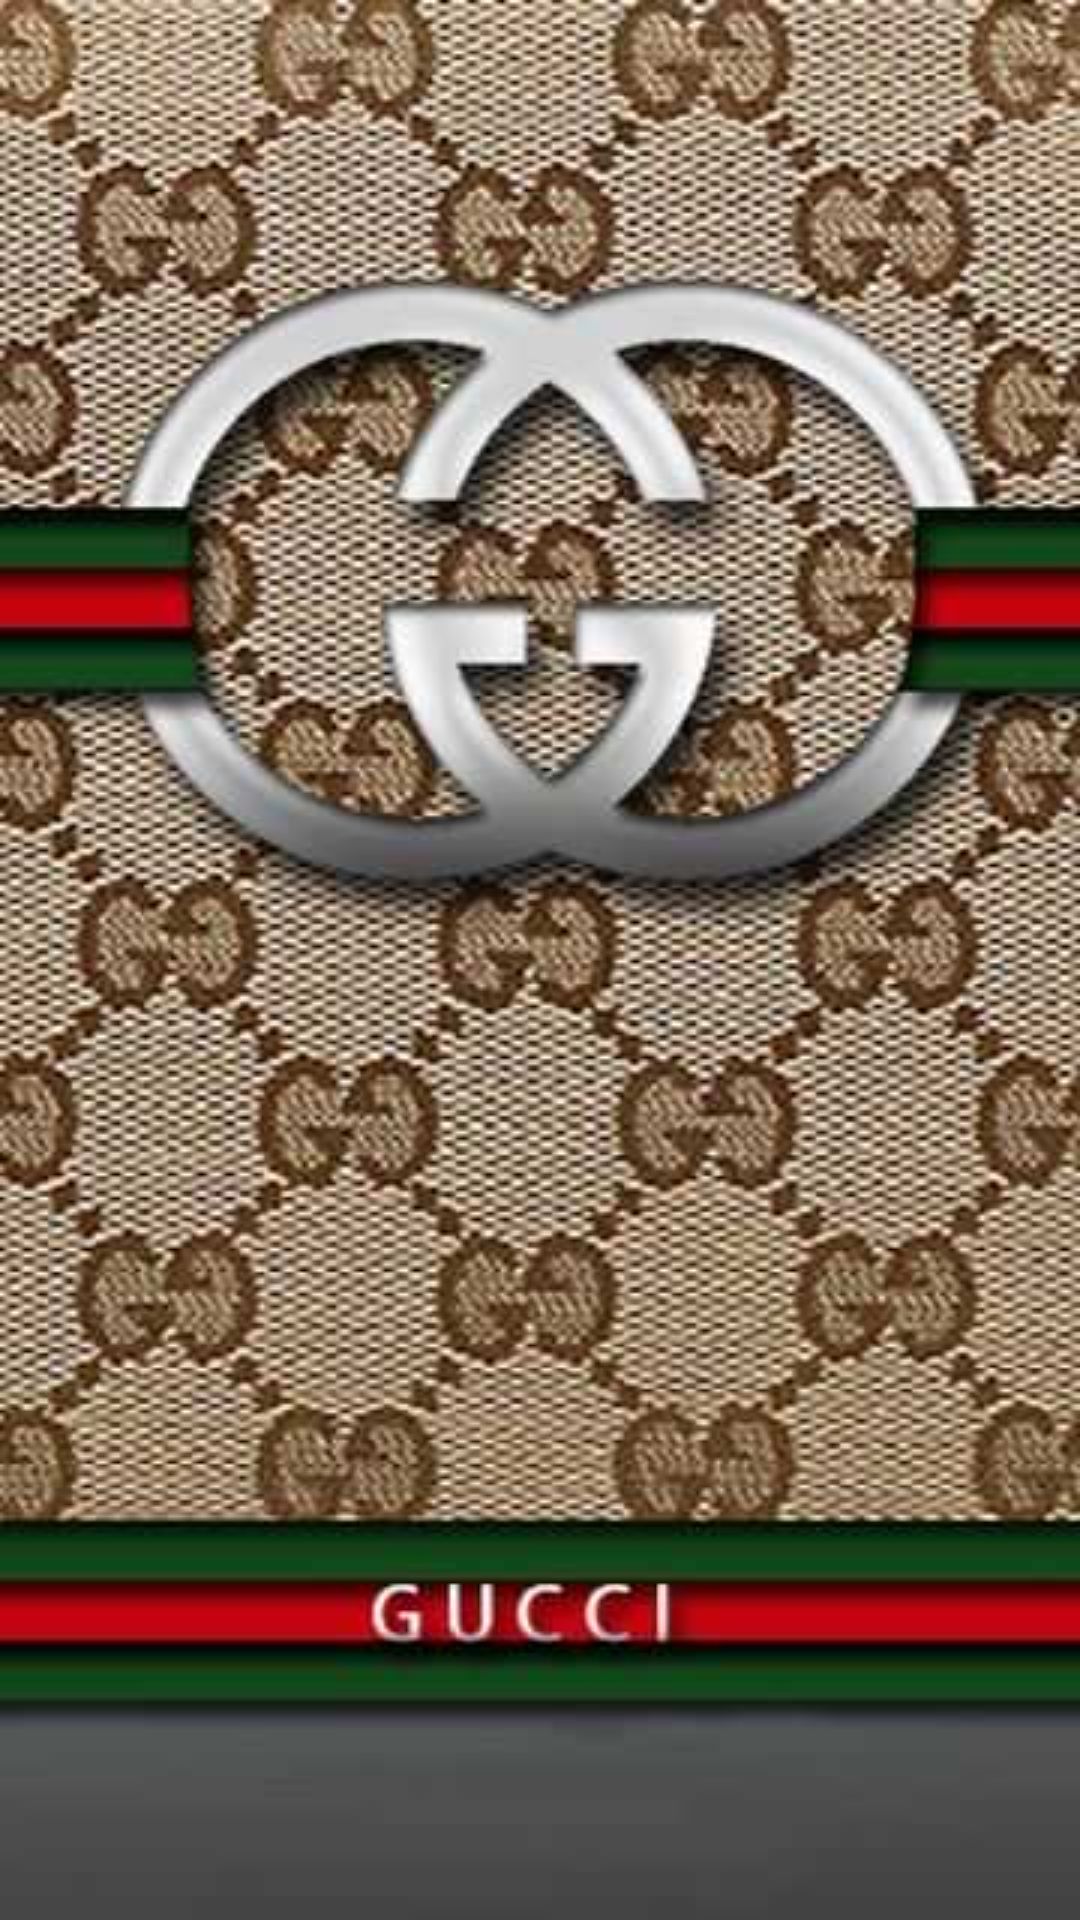 Cool Gucci Wallpapers - Top 15 Best Cool Gucci Wallpapers [ HQ ]